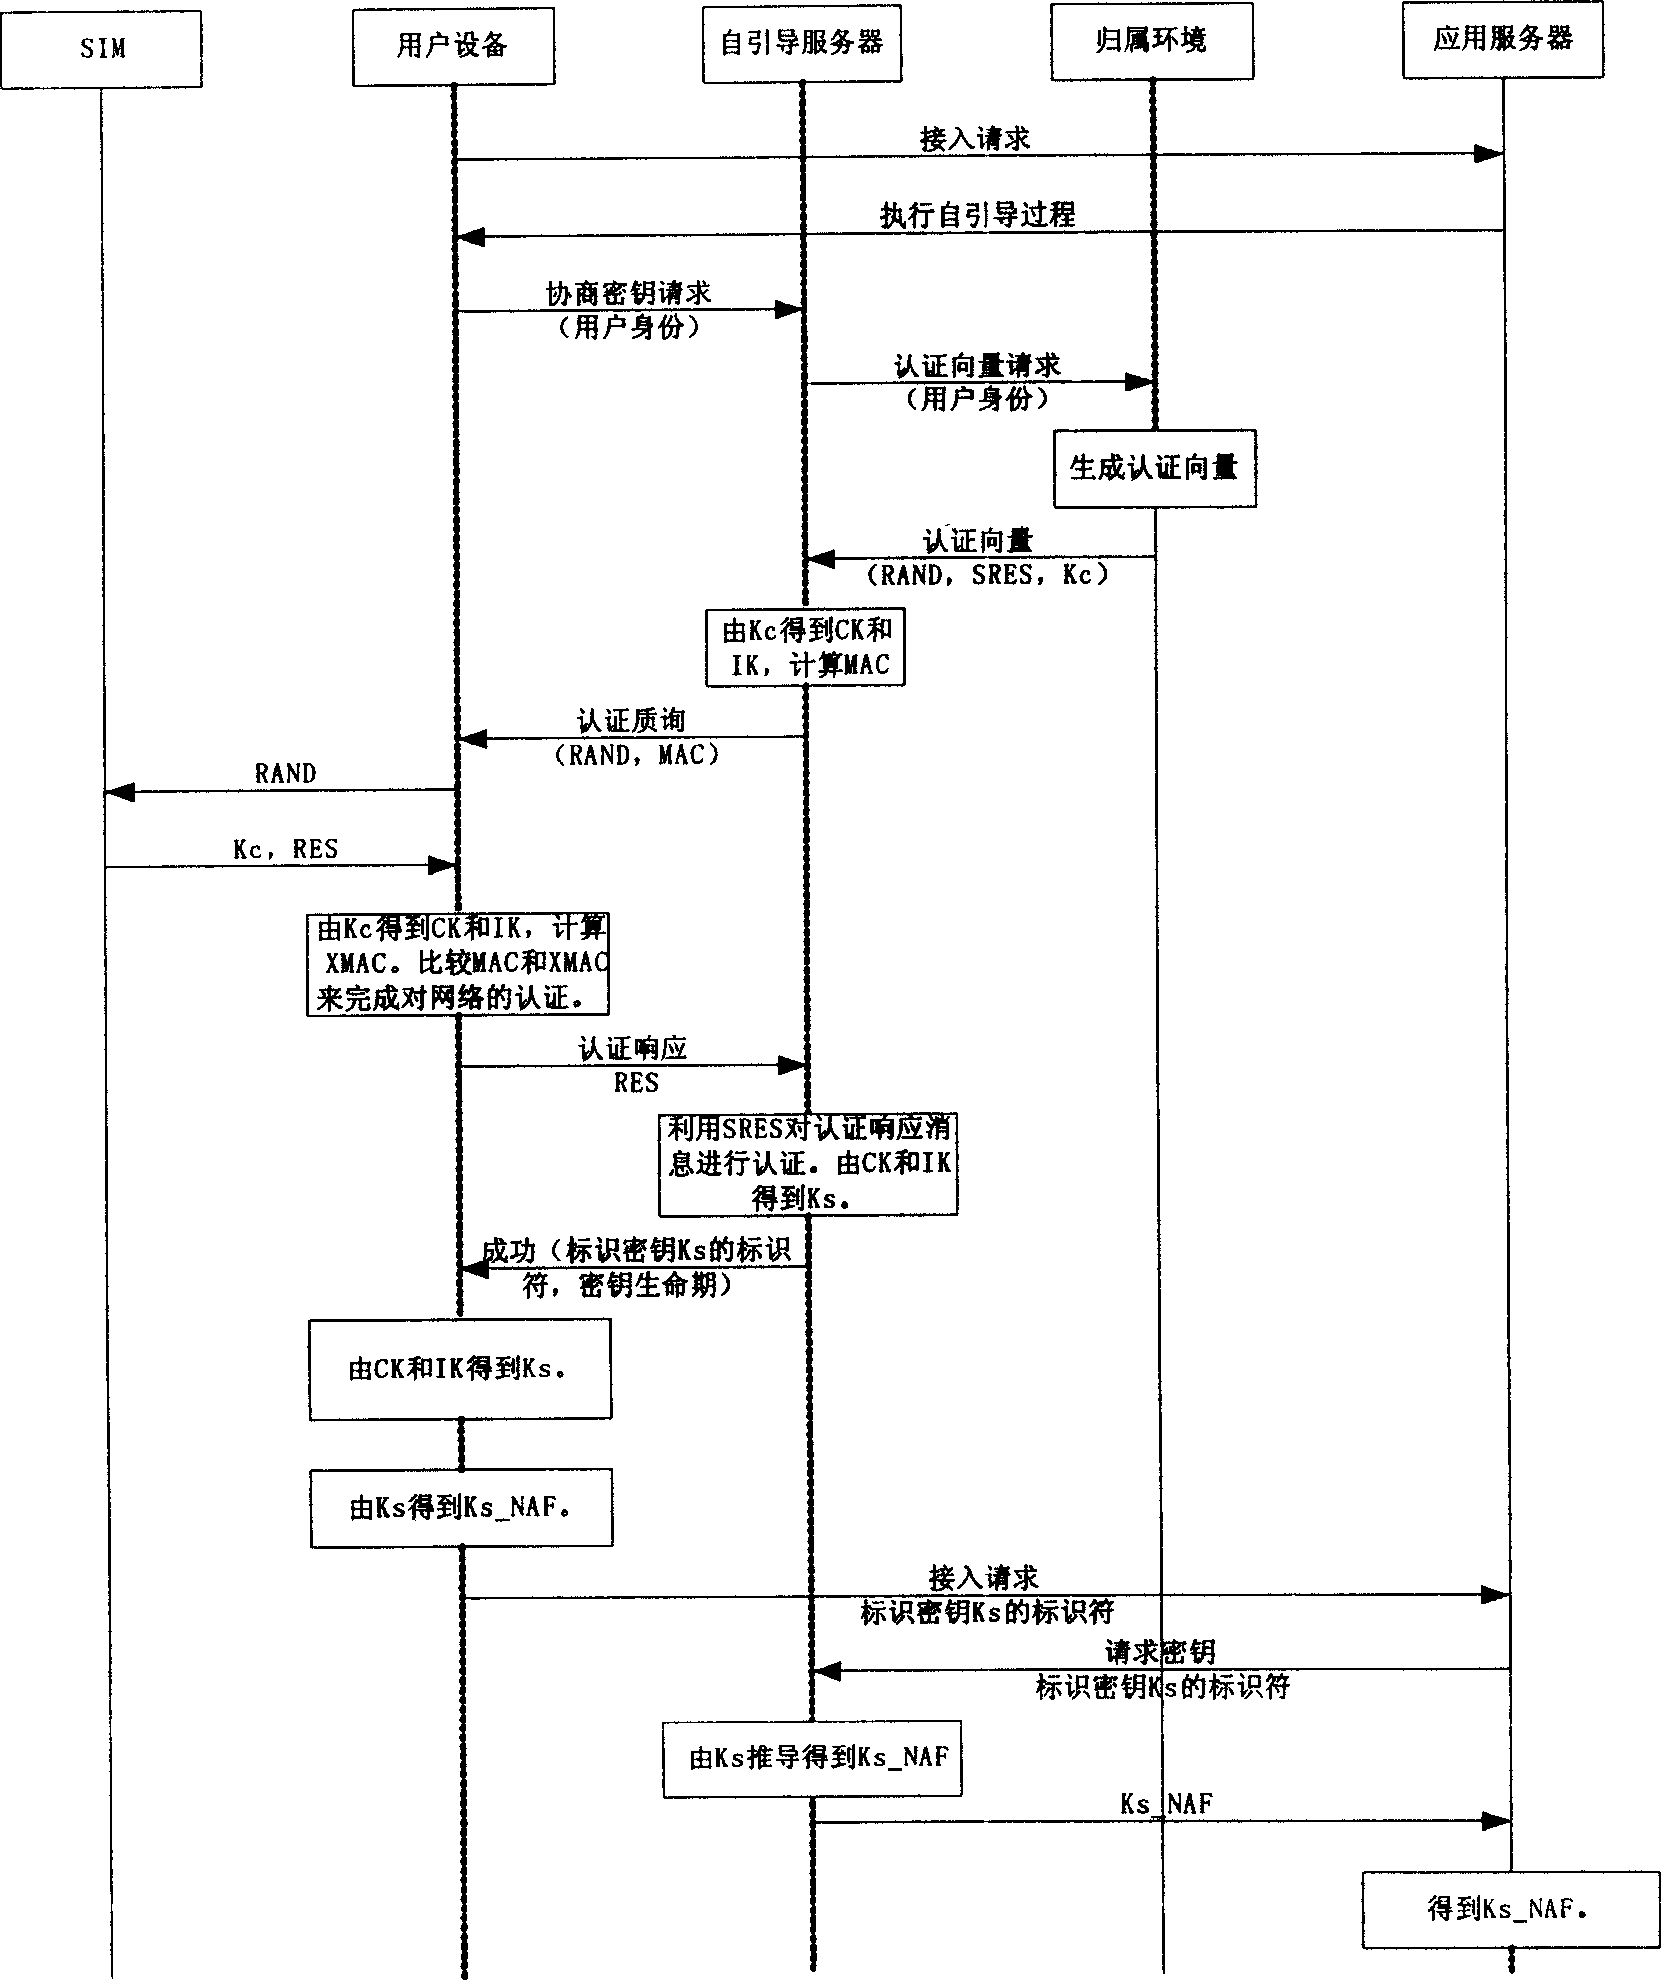 Method for negotiating about cipher key shared by users and application server